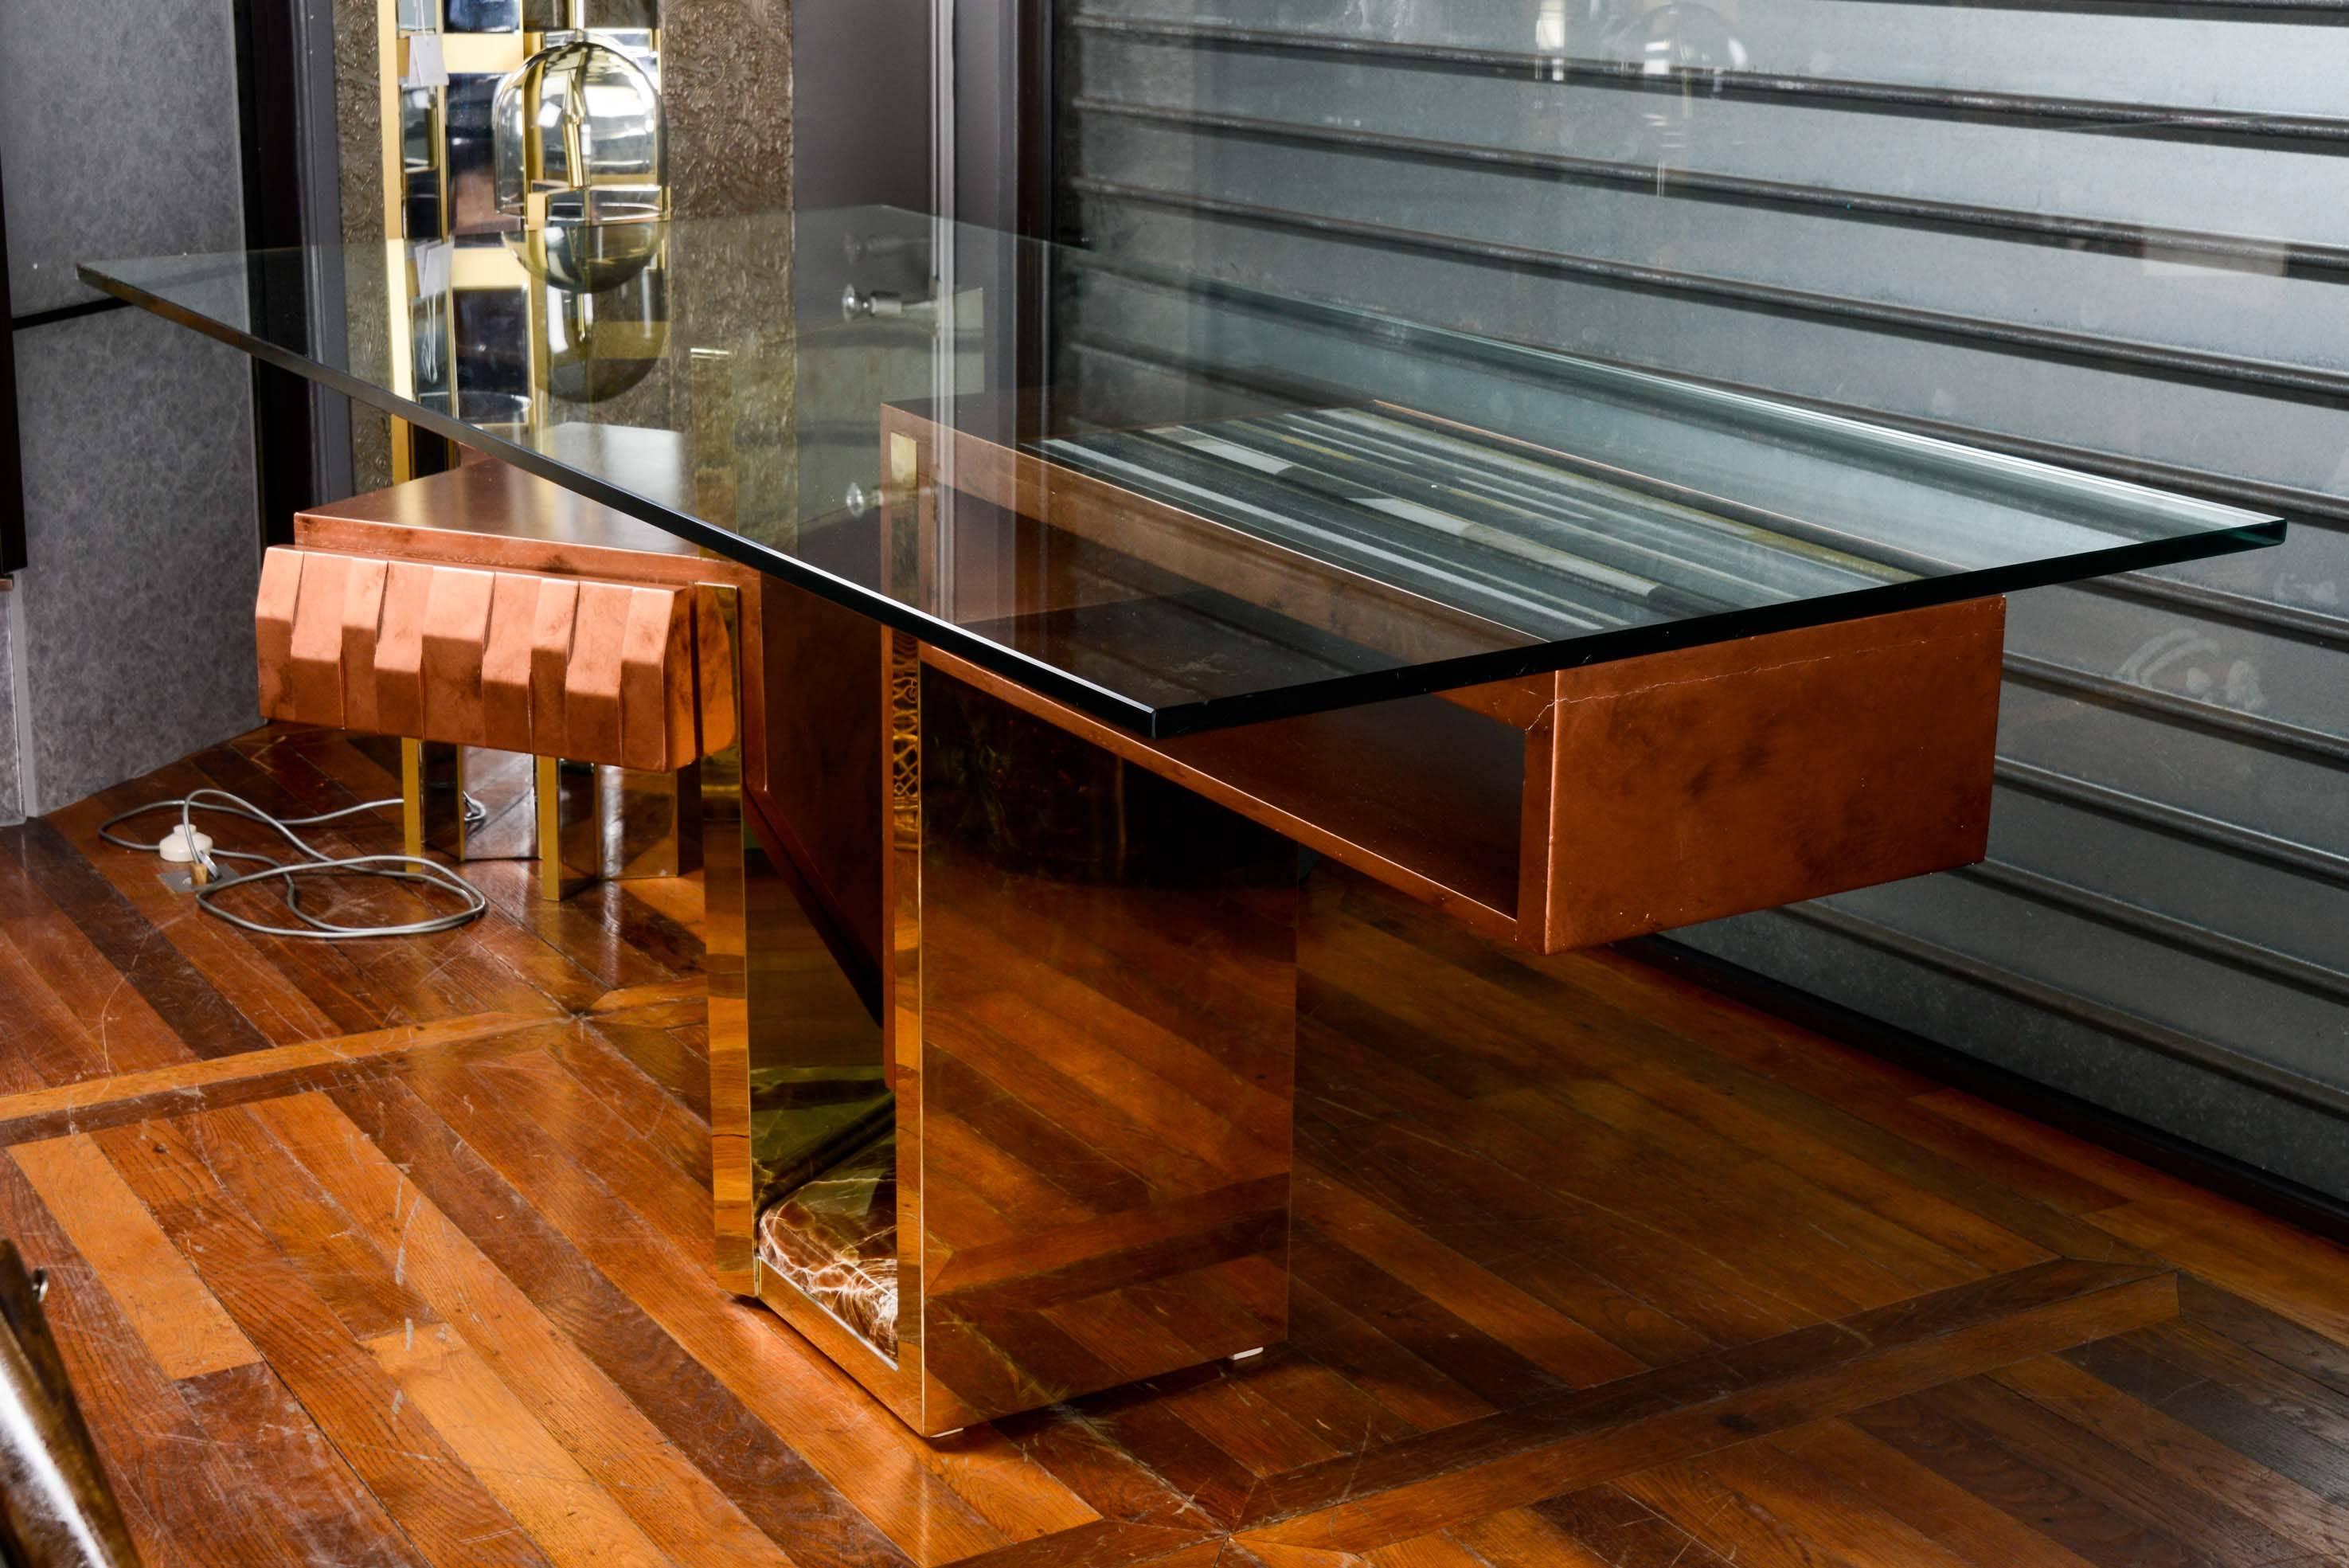 One-drawer desk with onyx, top in glass showing a ceramic plate.